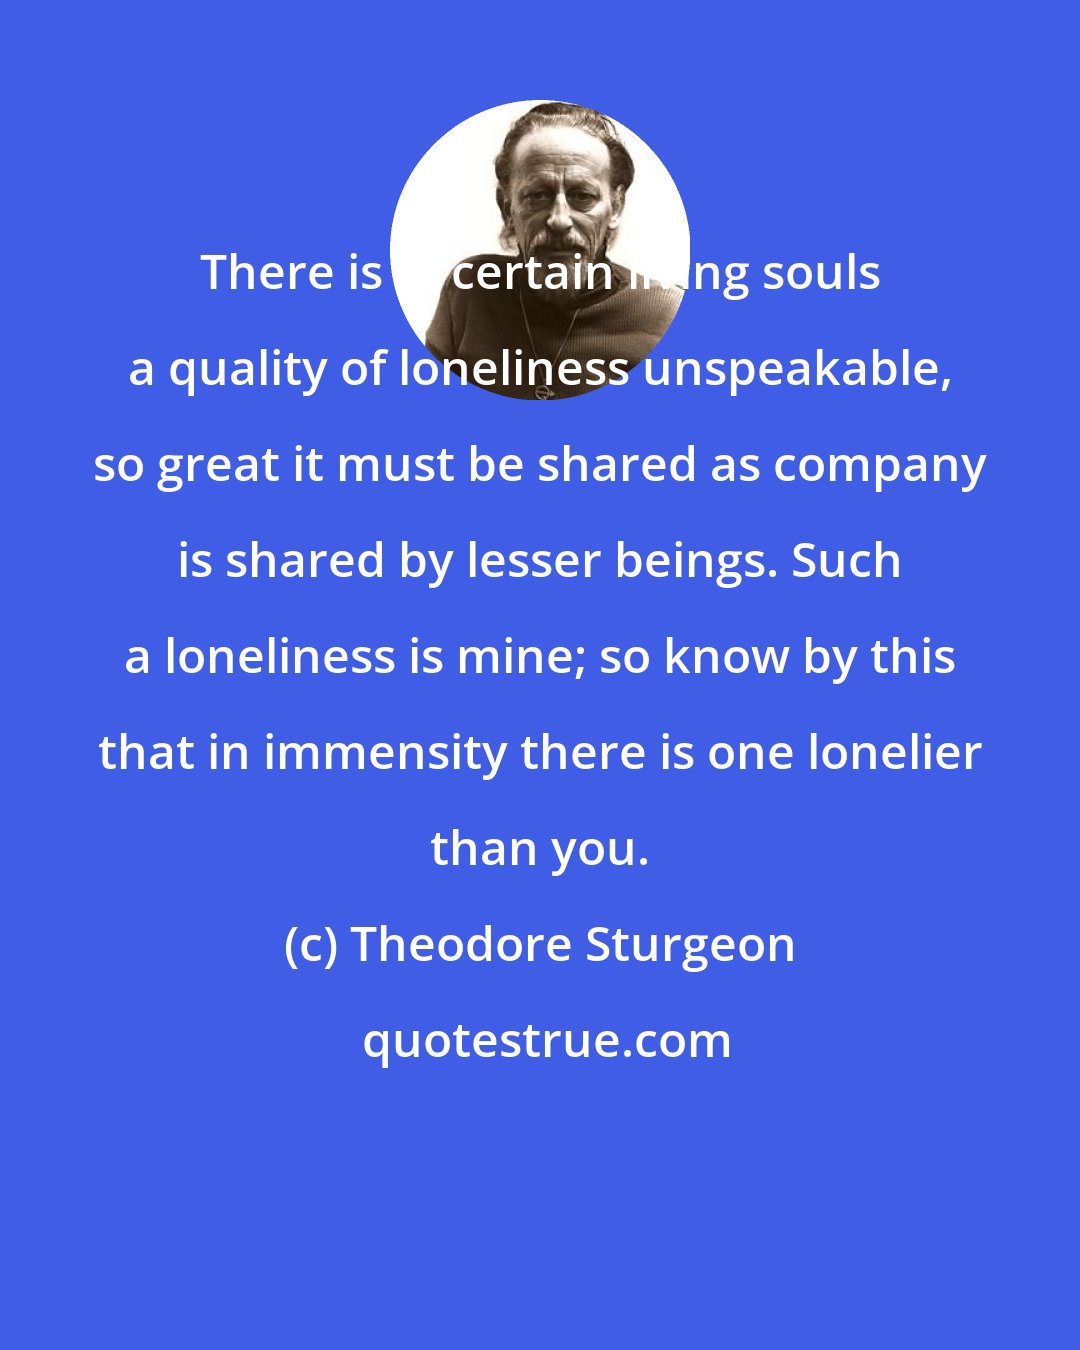 Theodore Sturgeon: There is in certain living souls a quality of loneliness unspeakable, so great it must be shared as company is shared by lesser beings. Such a loneliness is mine; so know by this that in immensity there is one lonelier than you.